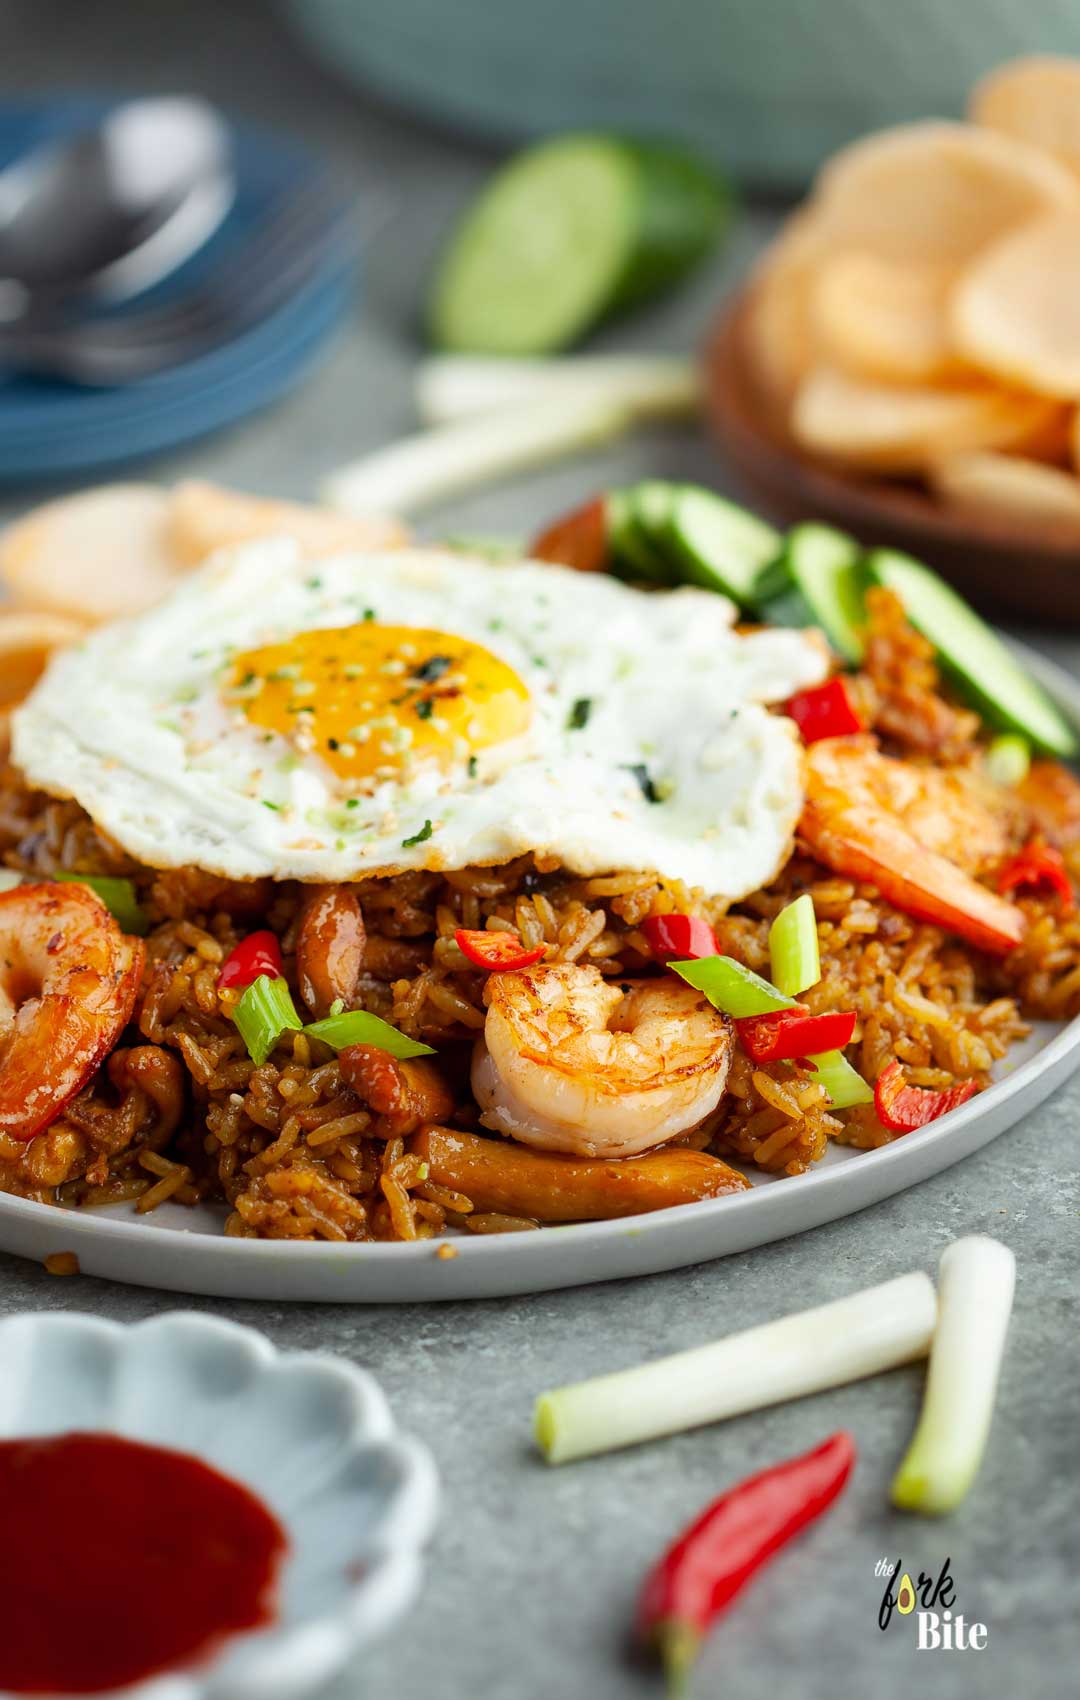 Making this dish is clear-cut, just like other recipes for fried rice. You cook the fried egg first and set it aside.  Then, you sauté the aromatics, then the meat, followed by the rice, and then season with kecap manis and shrimp paste (if you prefer).